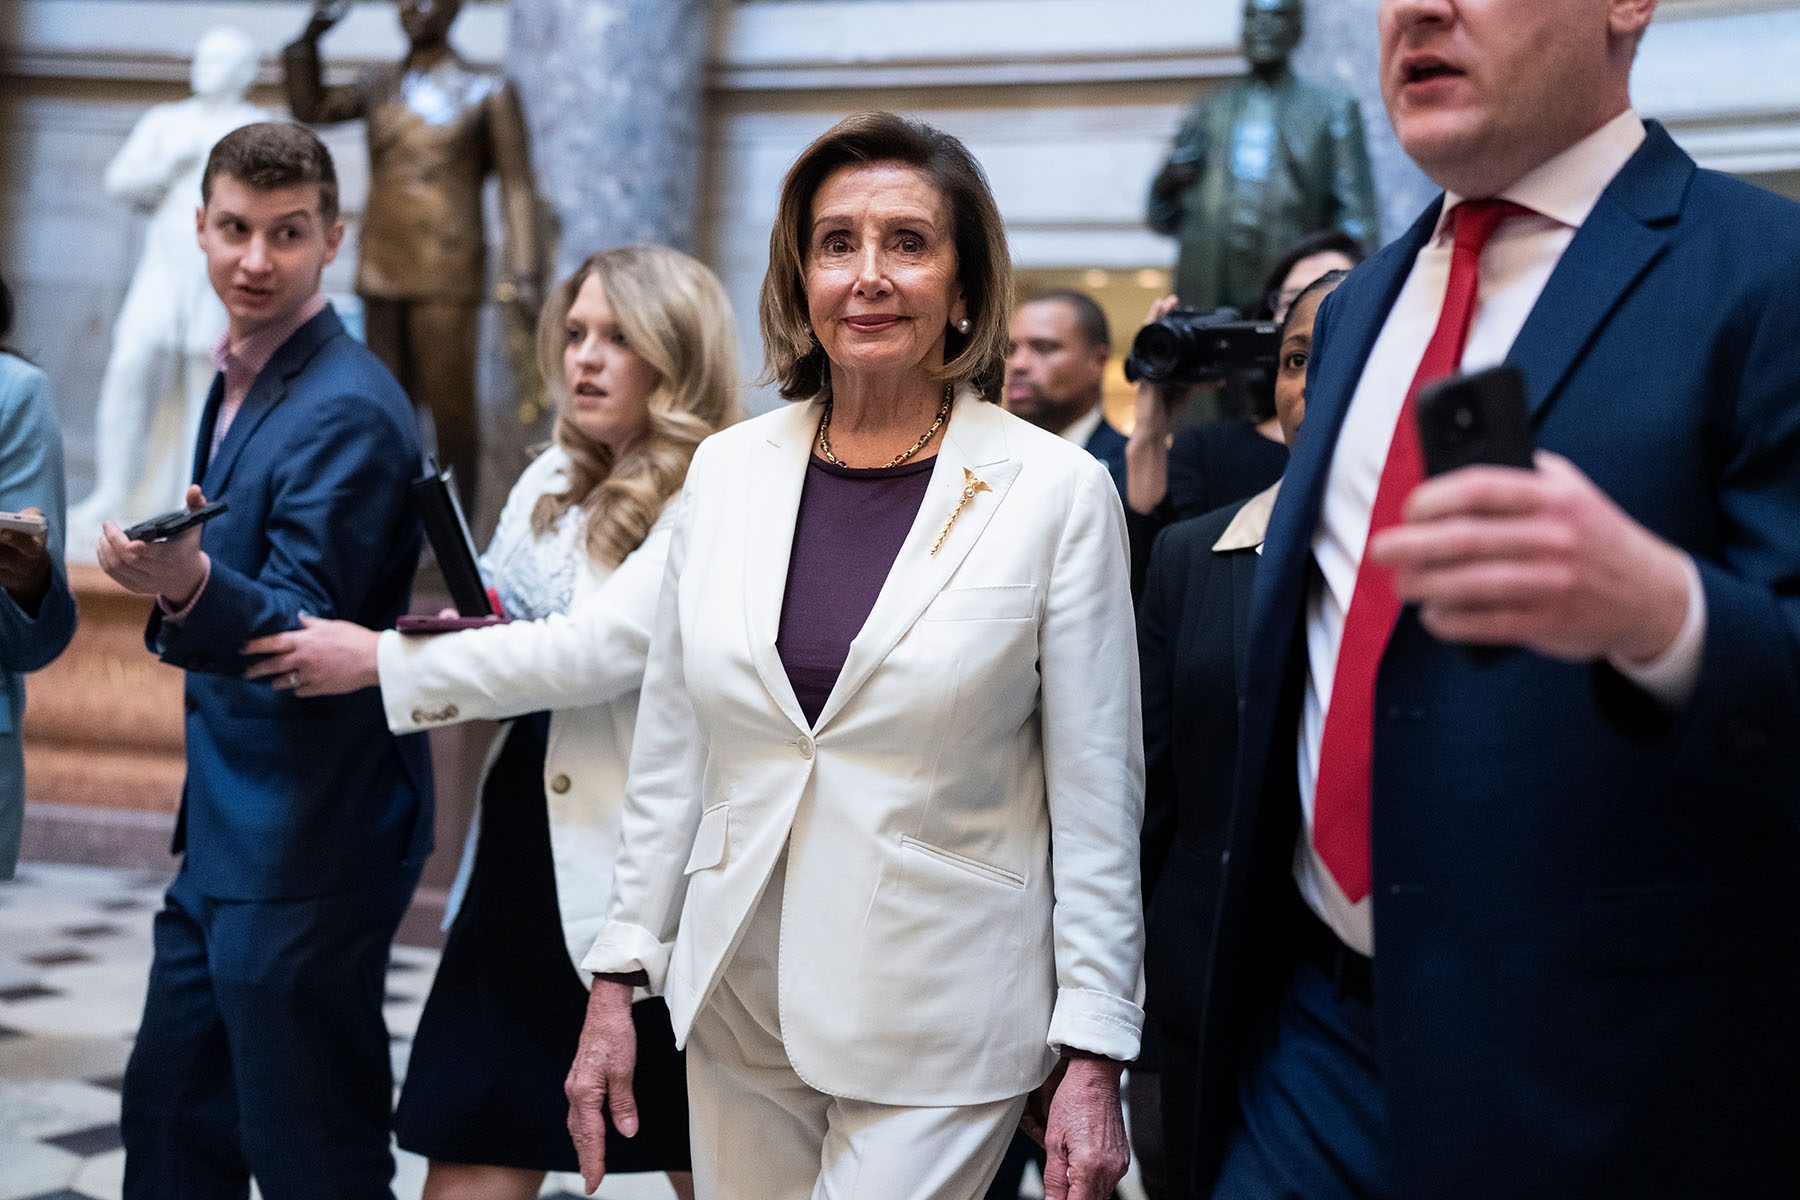 Nancy Pelosi, surrounded by staffers and reporters walk through the halls of Congress.